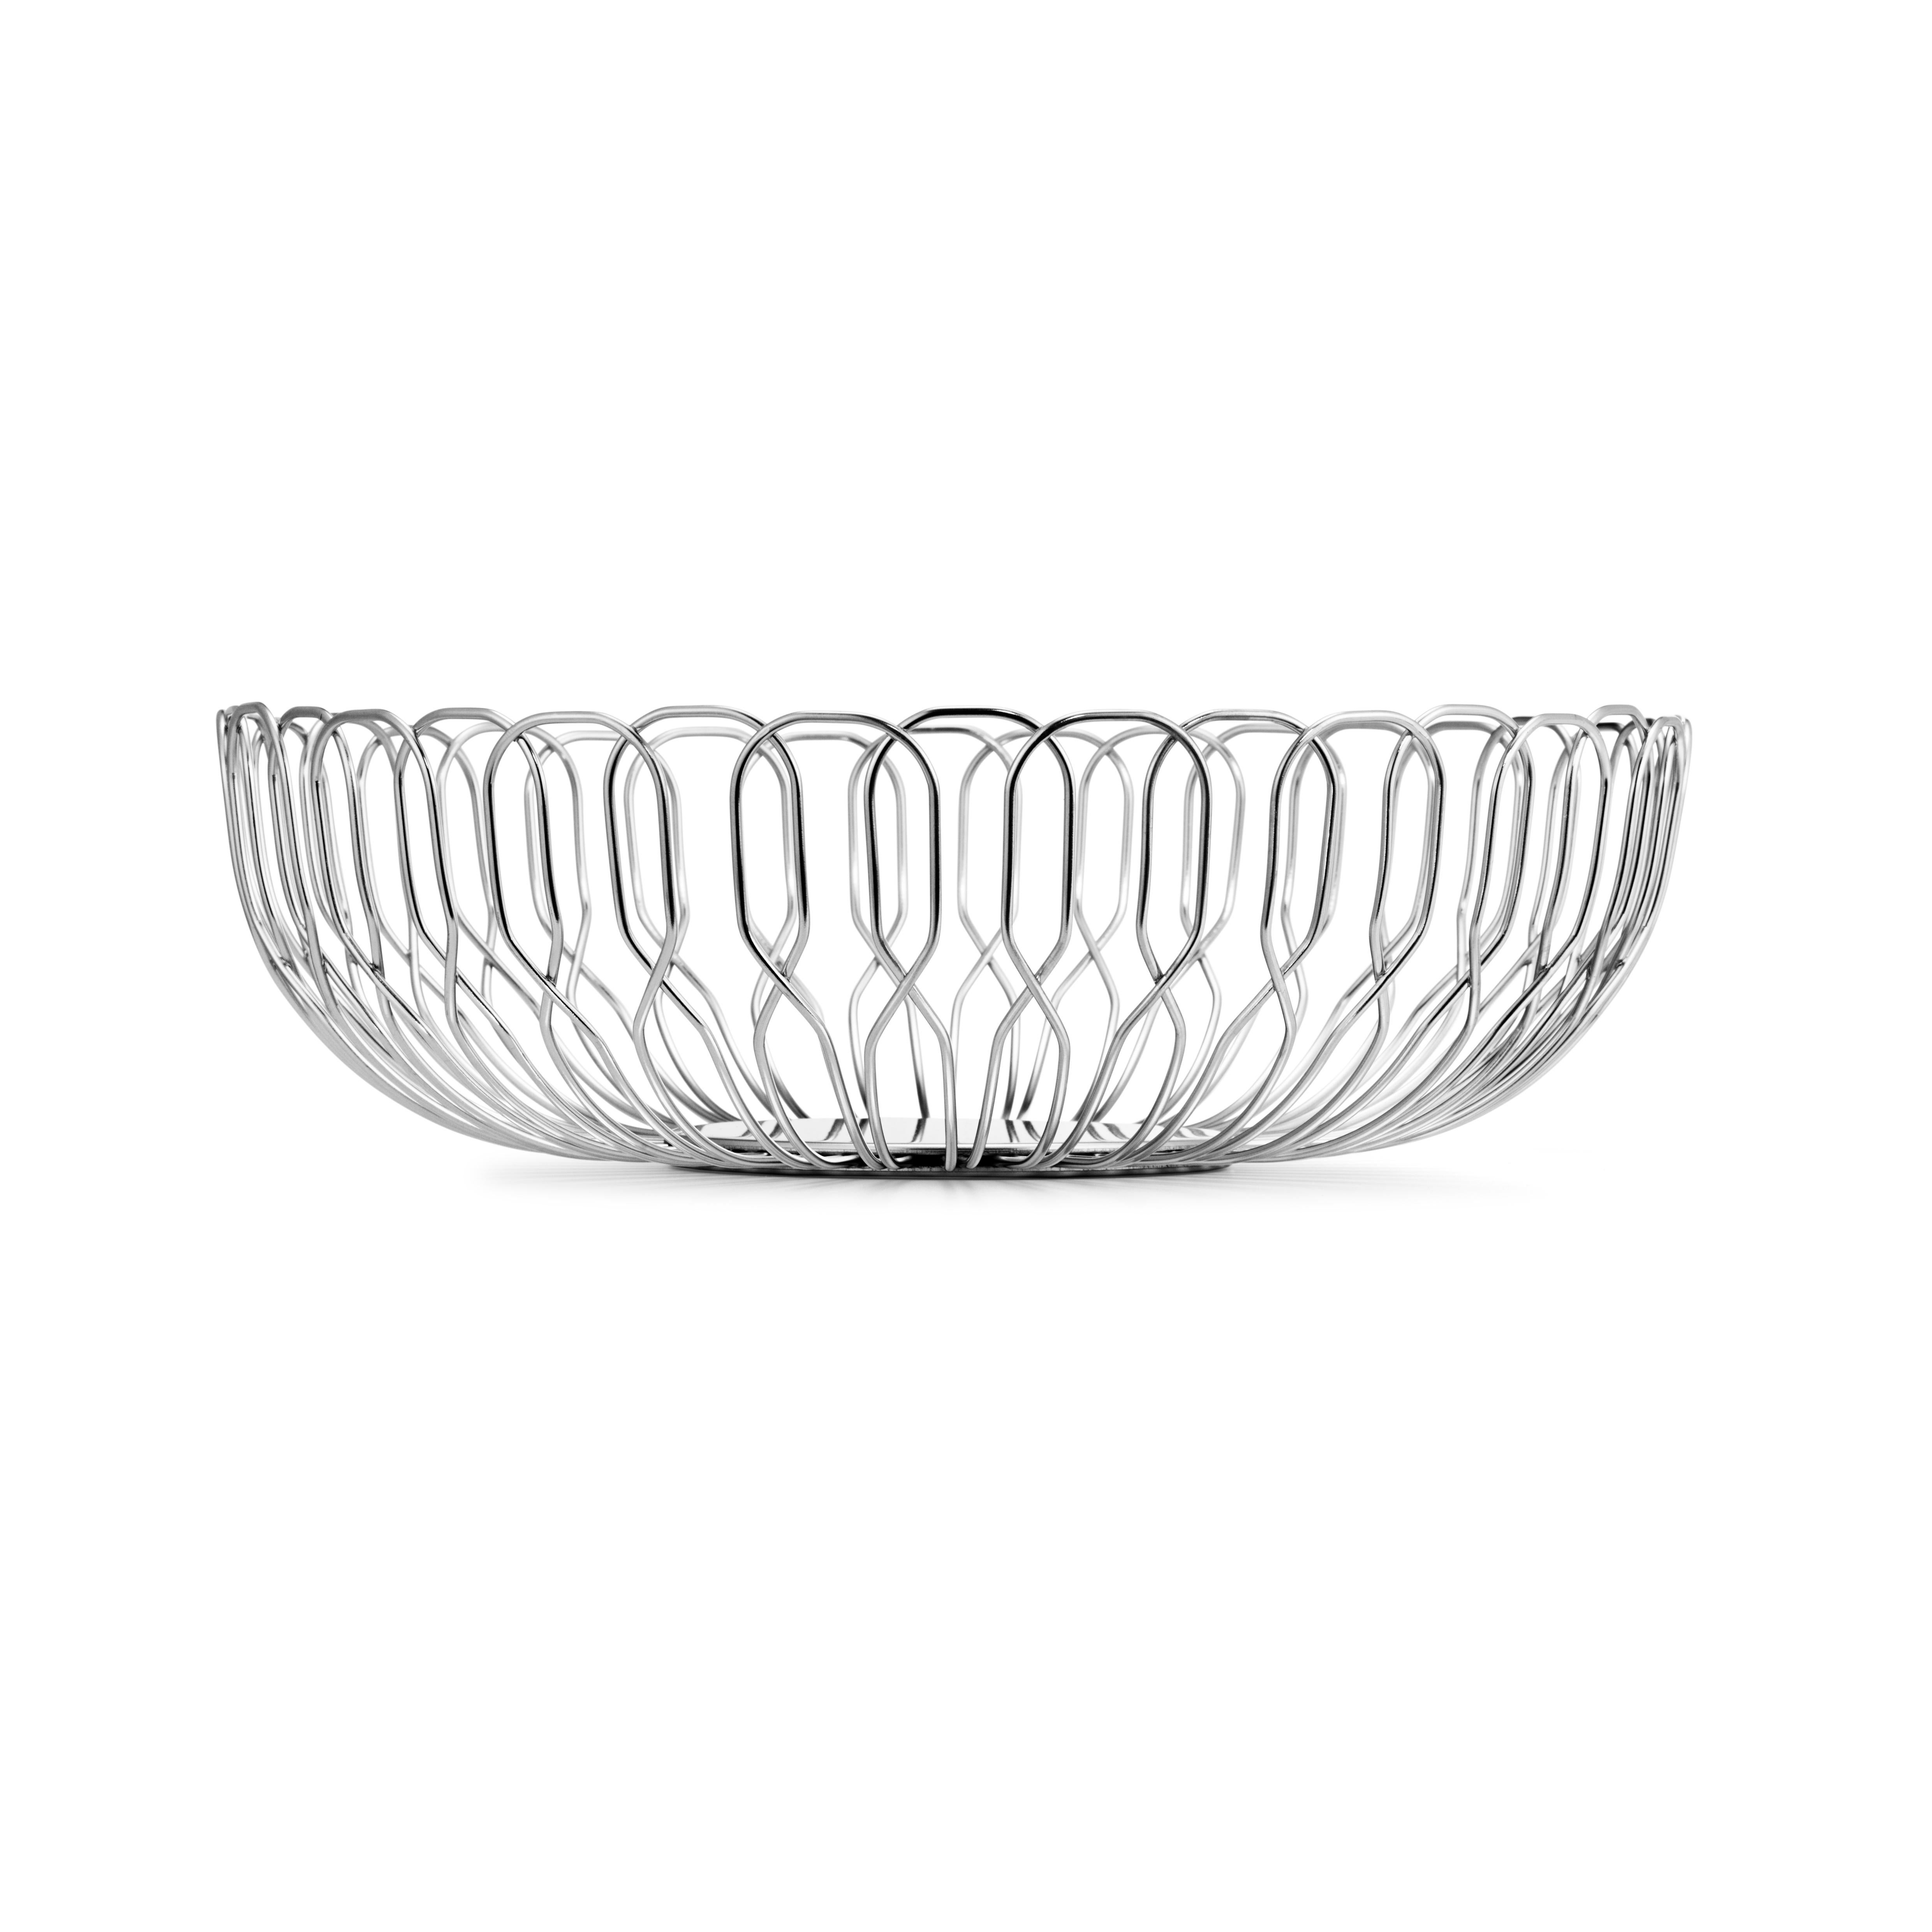 The woven form of this wire bread basket references the shapes of the other products of the Alfredo collection. The Alfredo collection brings style and energy to your daily routine.